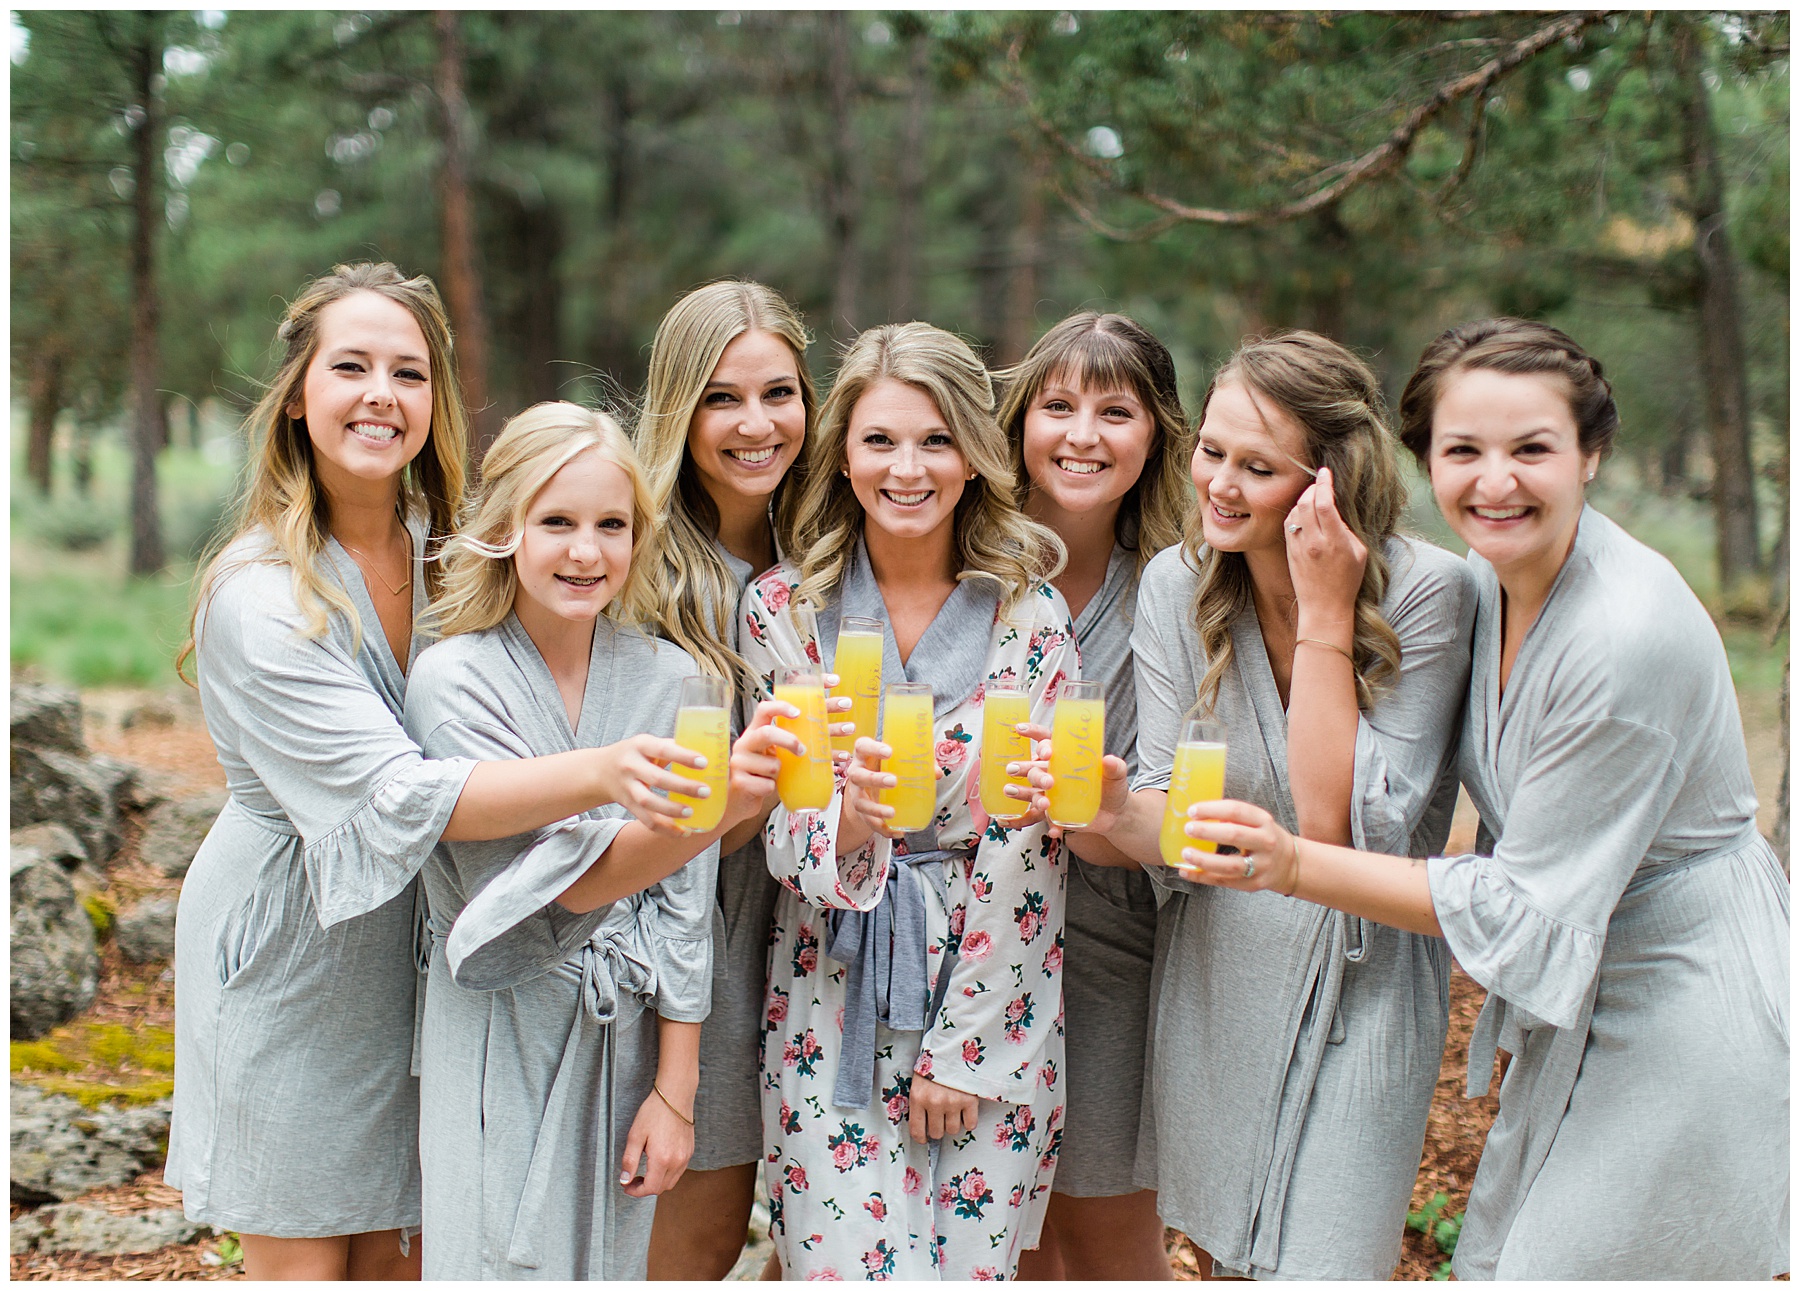 McKenna and her bridesmaids standing together in their robes in the midst of getting ready for the day with their mimosas smiling.